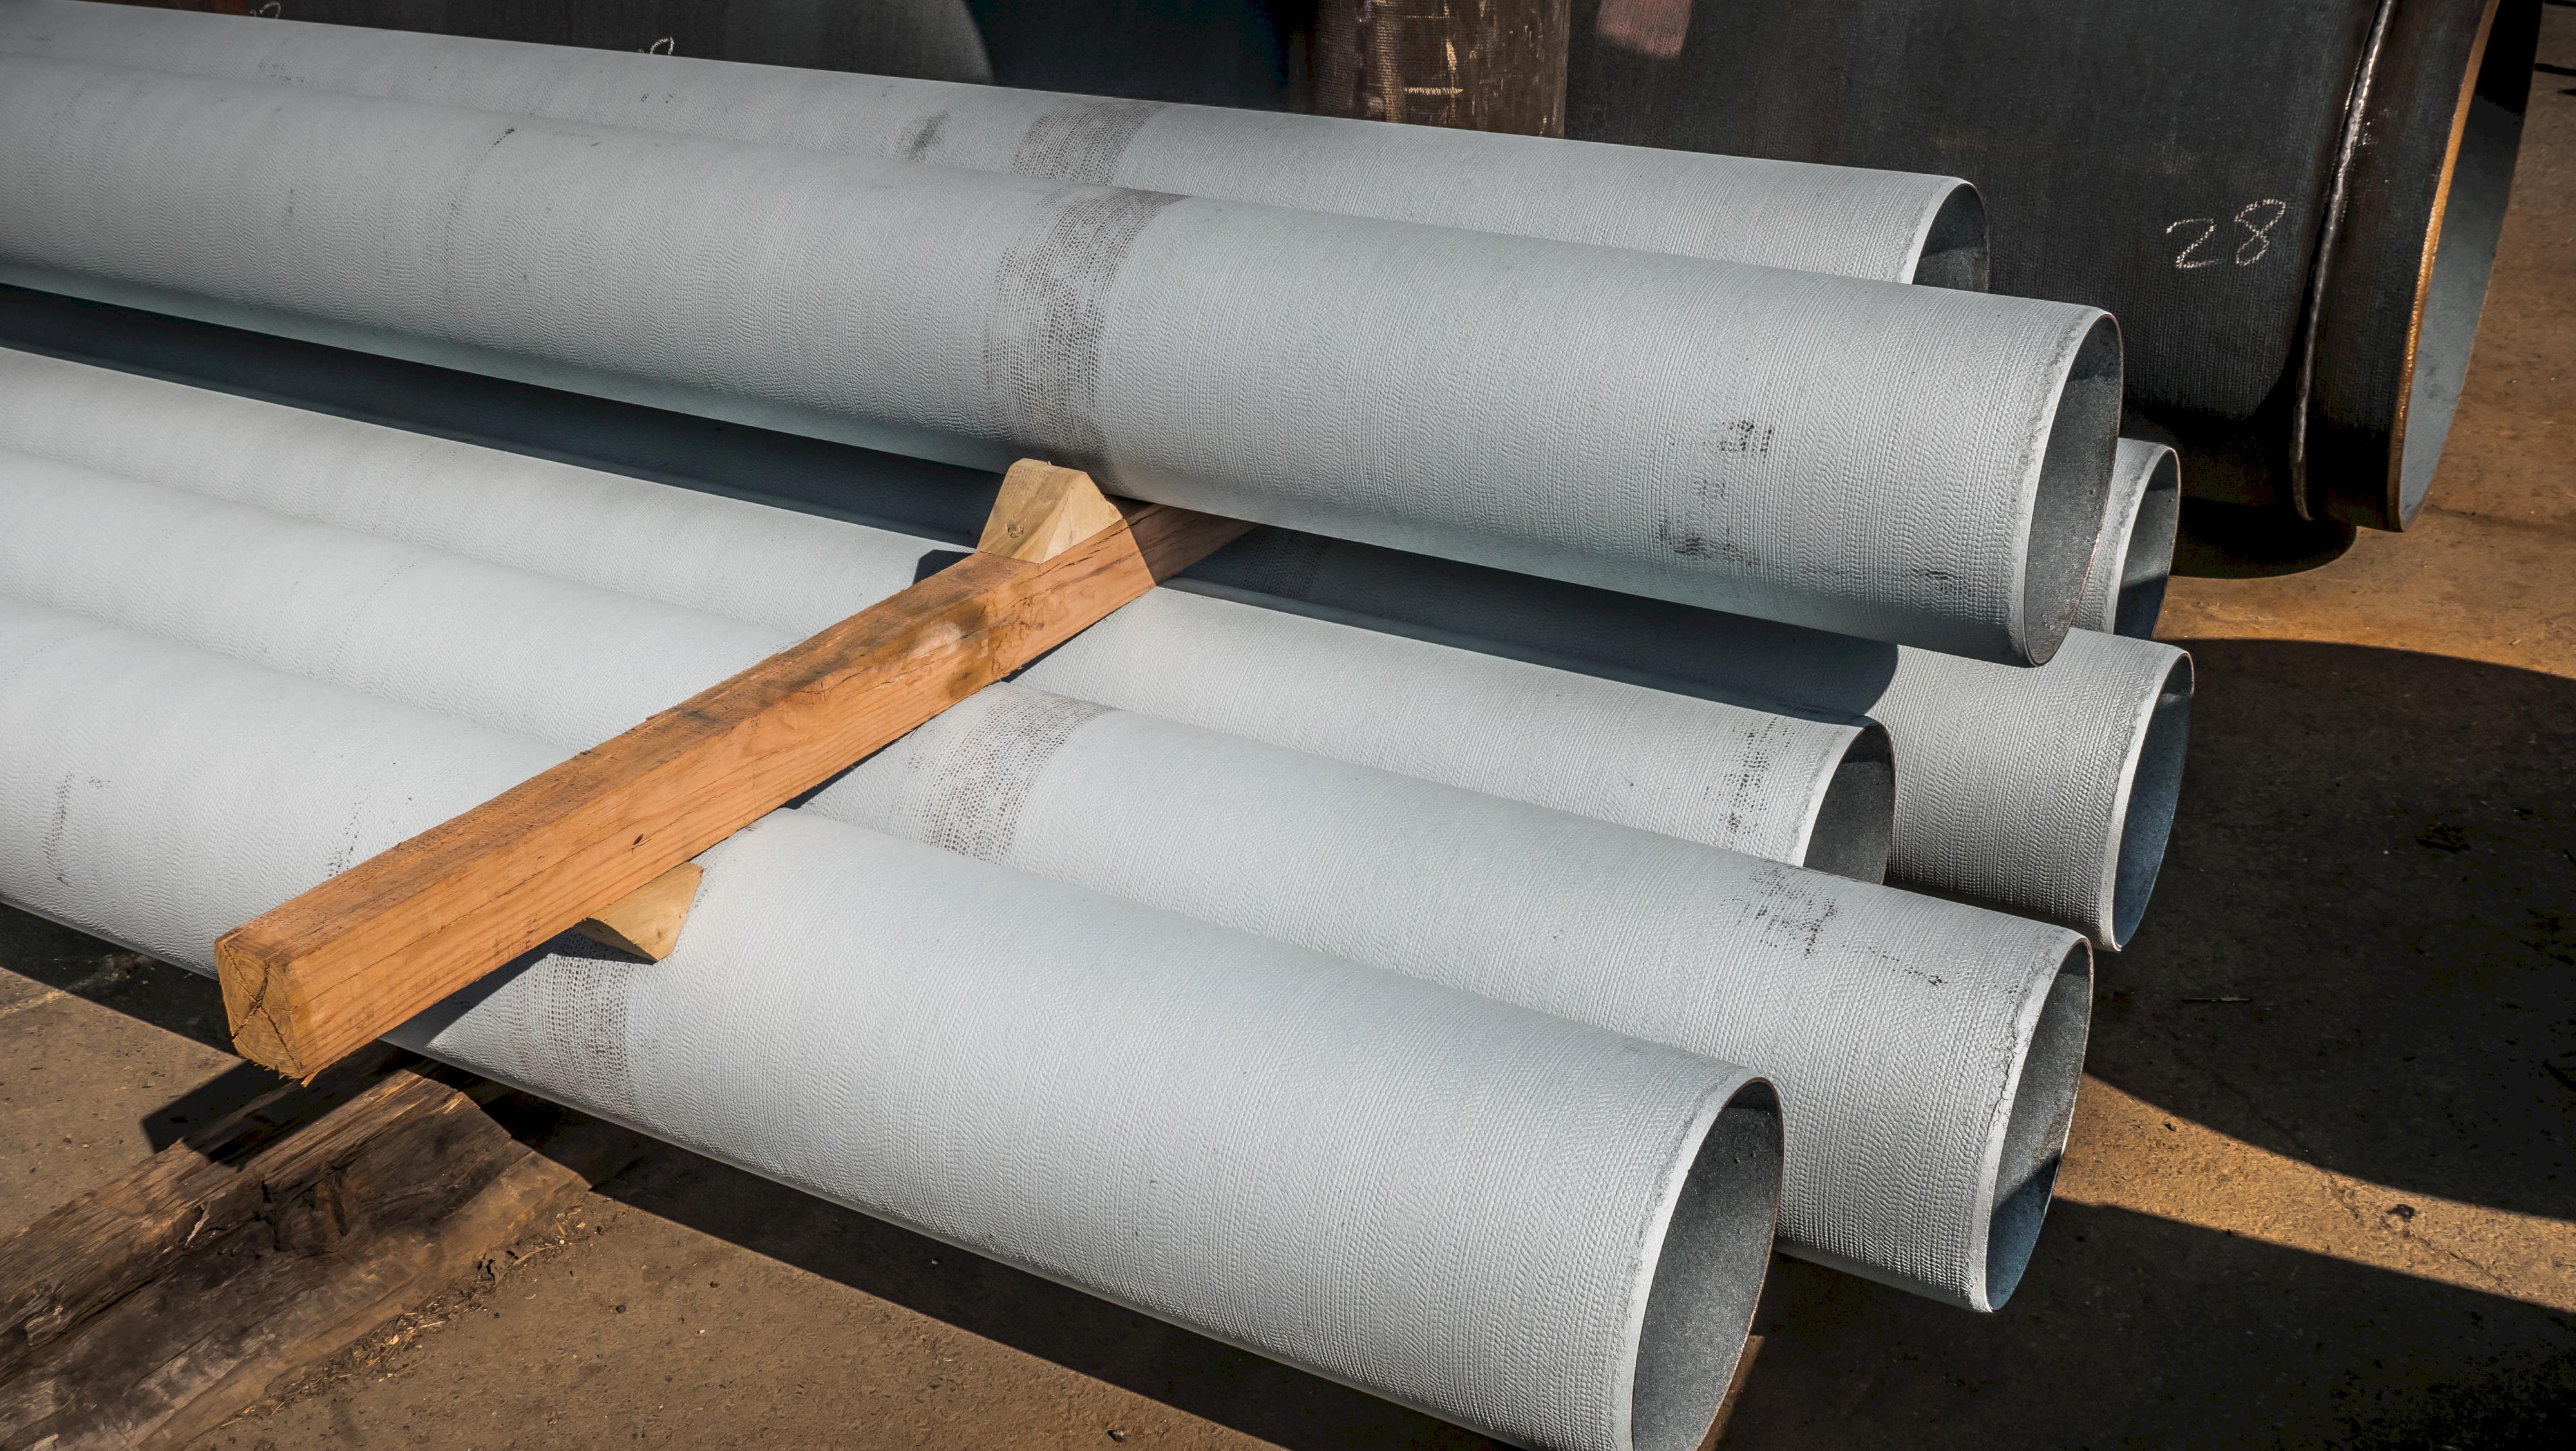 Why Zinc on Ductile Iron Pipe and What's the Hype? - McWane Ductile ...